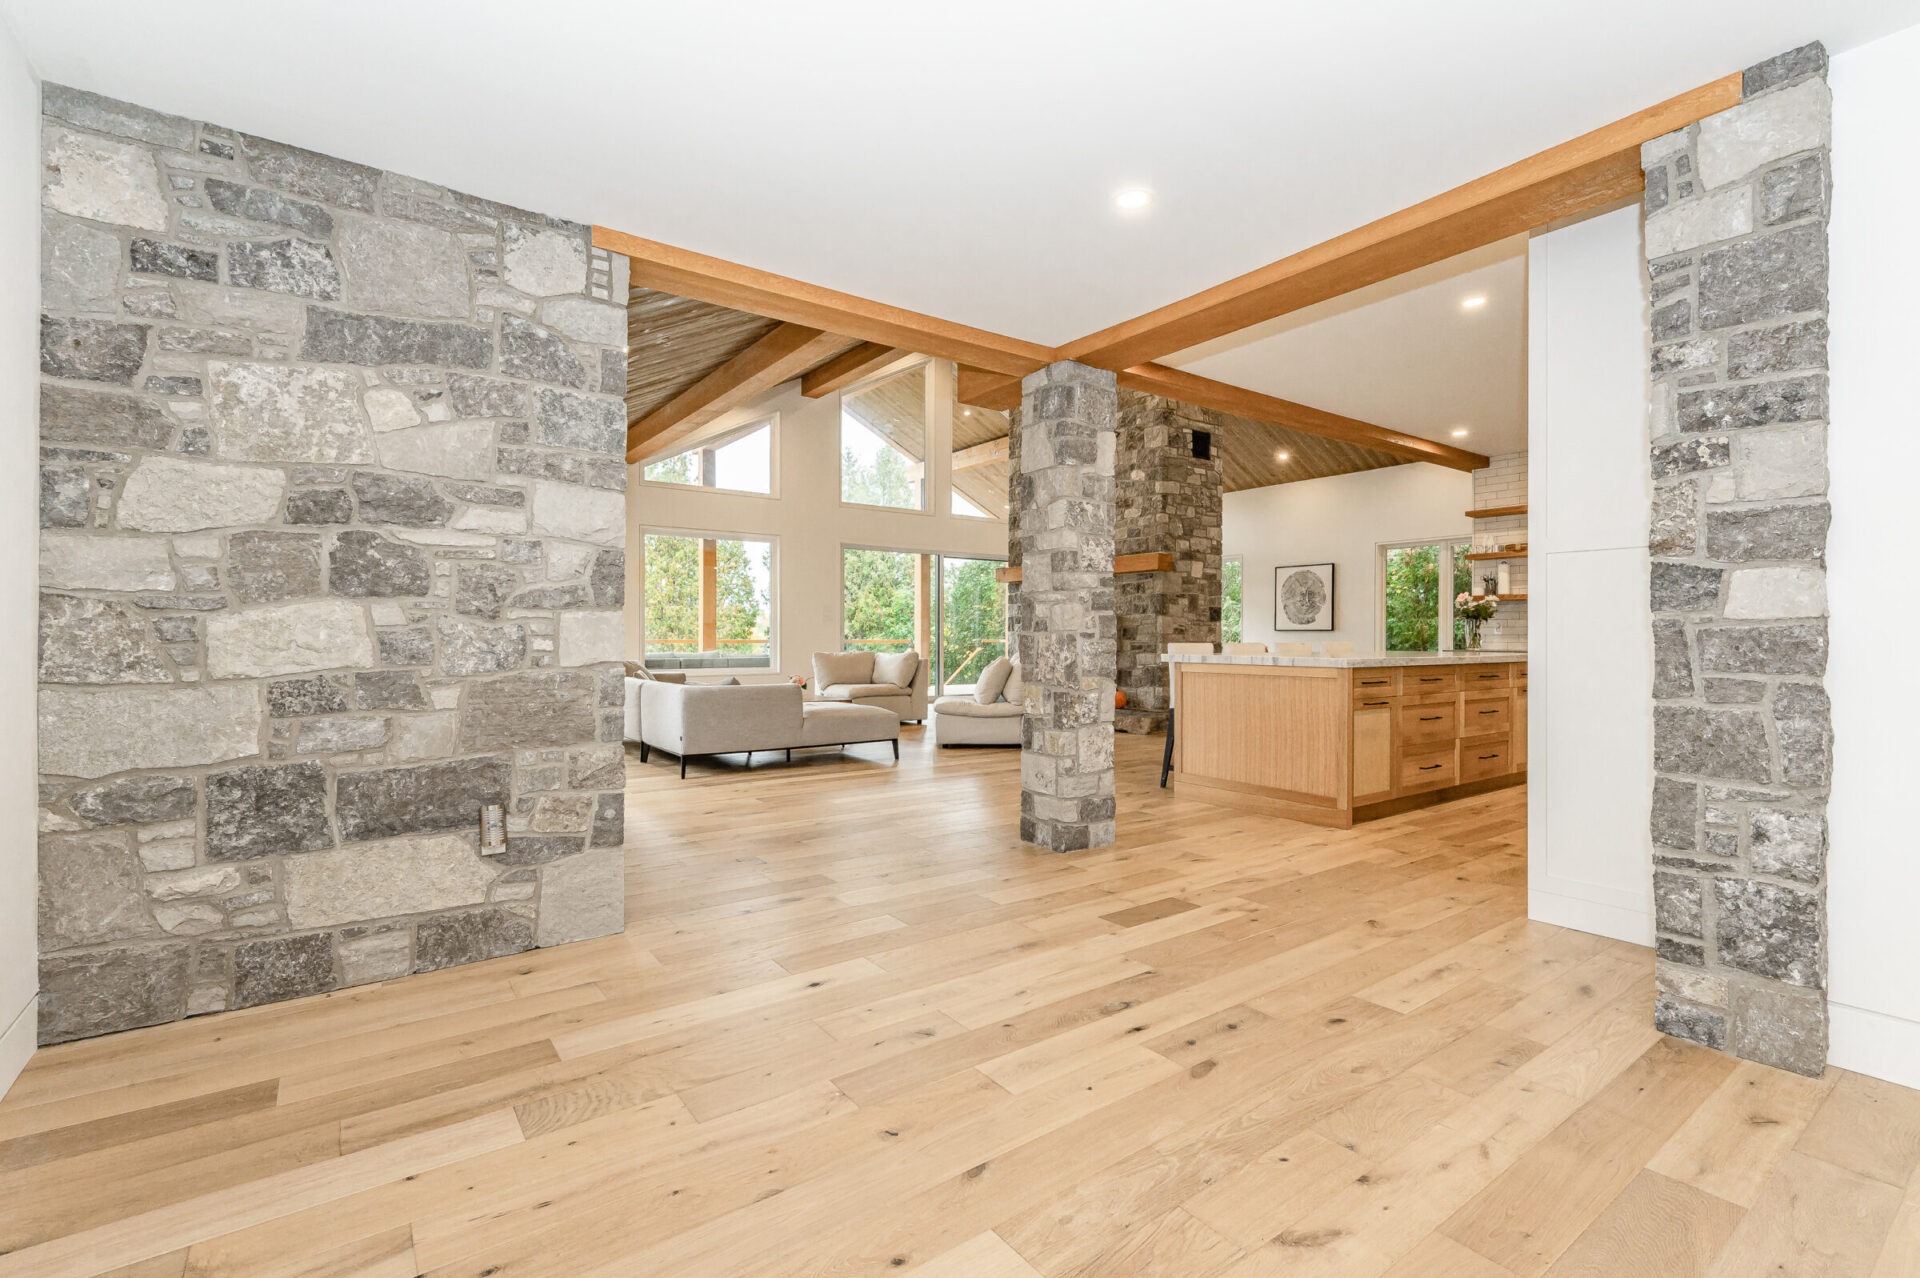 Modern spacious room with natural light, wooden floors and ceiling beams, stone columns, plush seating, and an open-plan kitchen in the background.